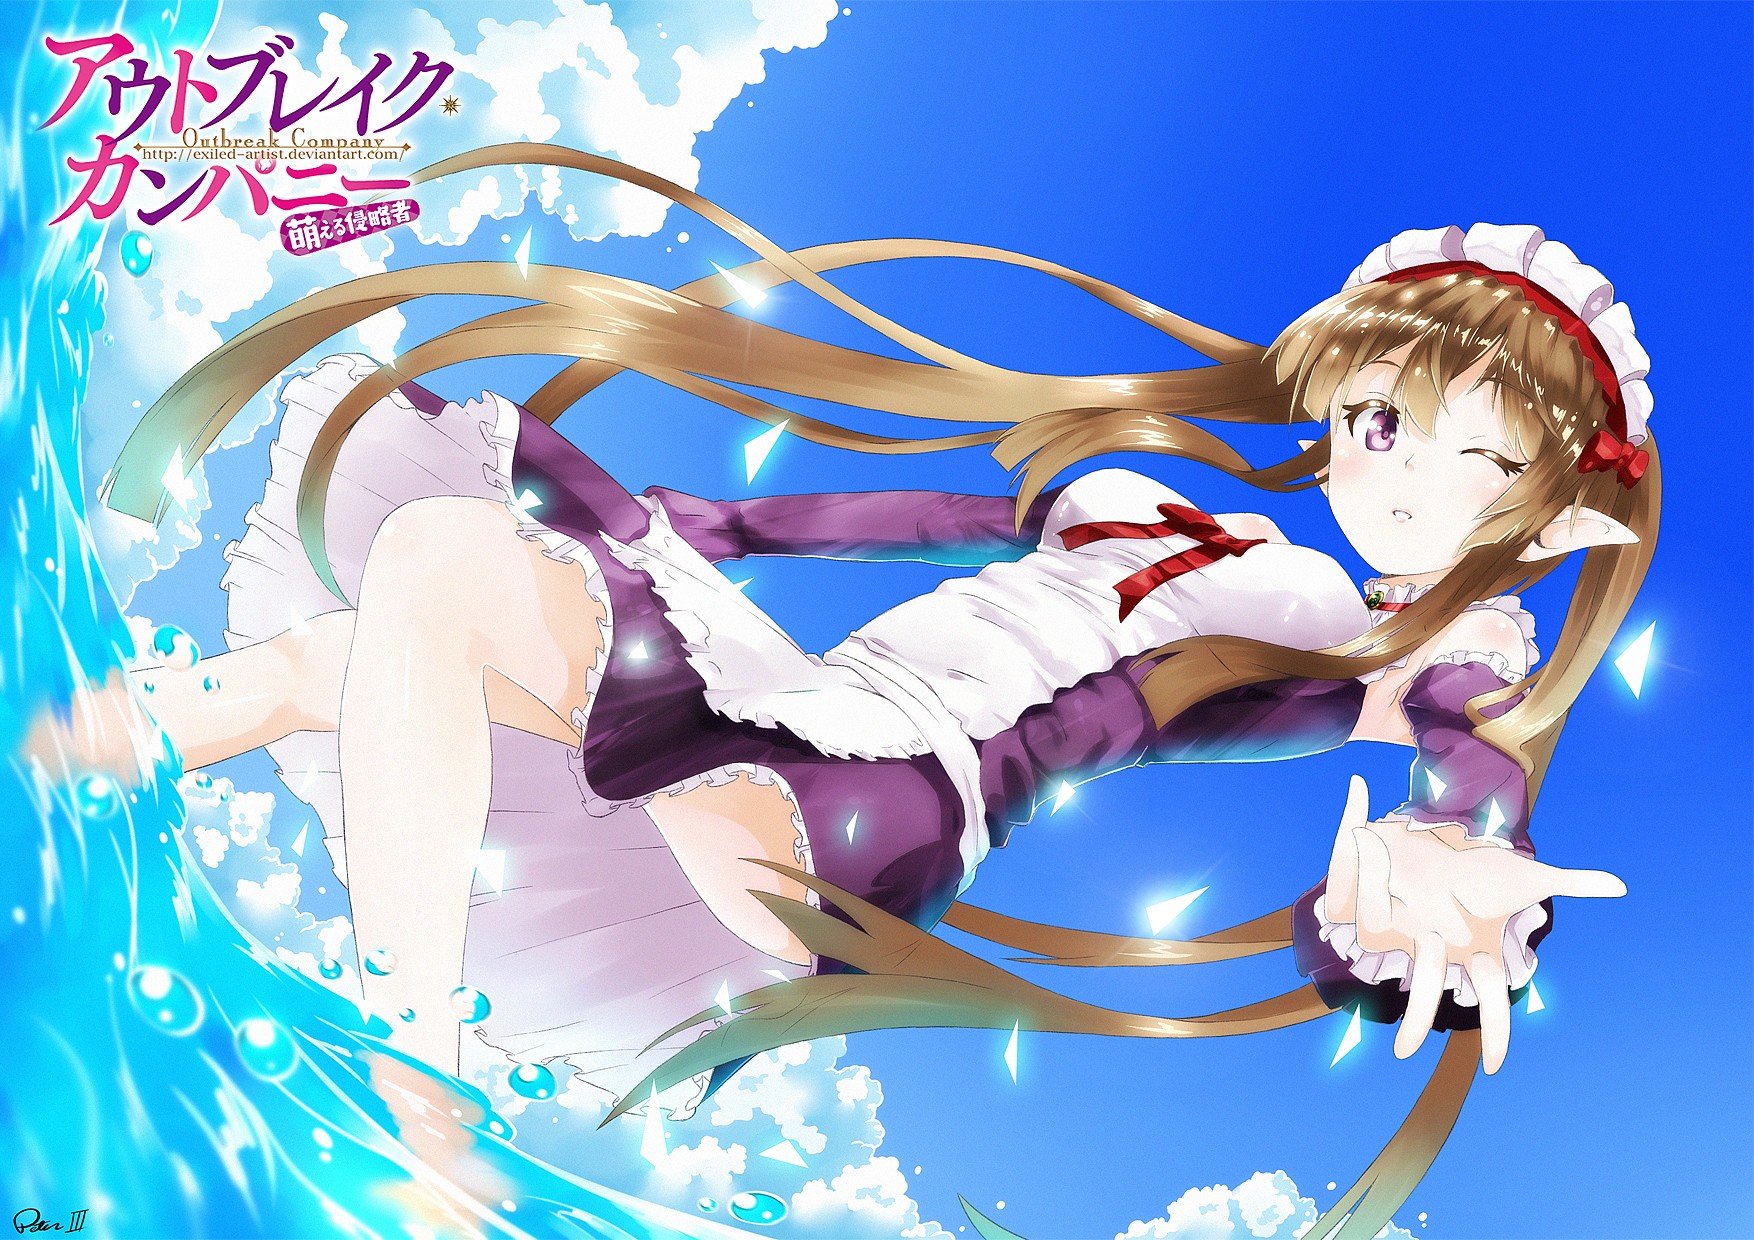 Awesome Outbreak Company Home Screen Wallpaper for PC High Definition